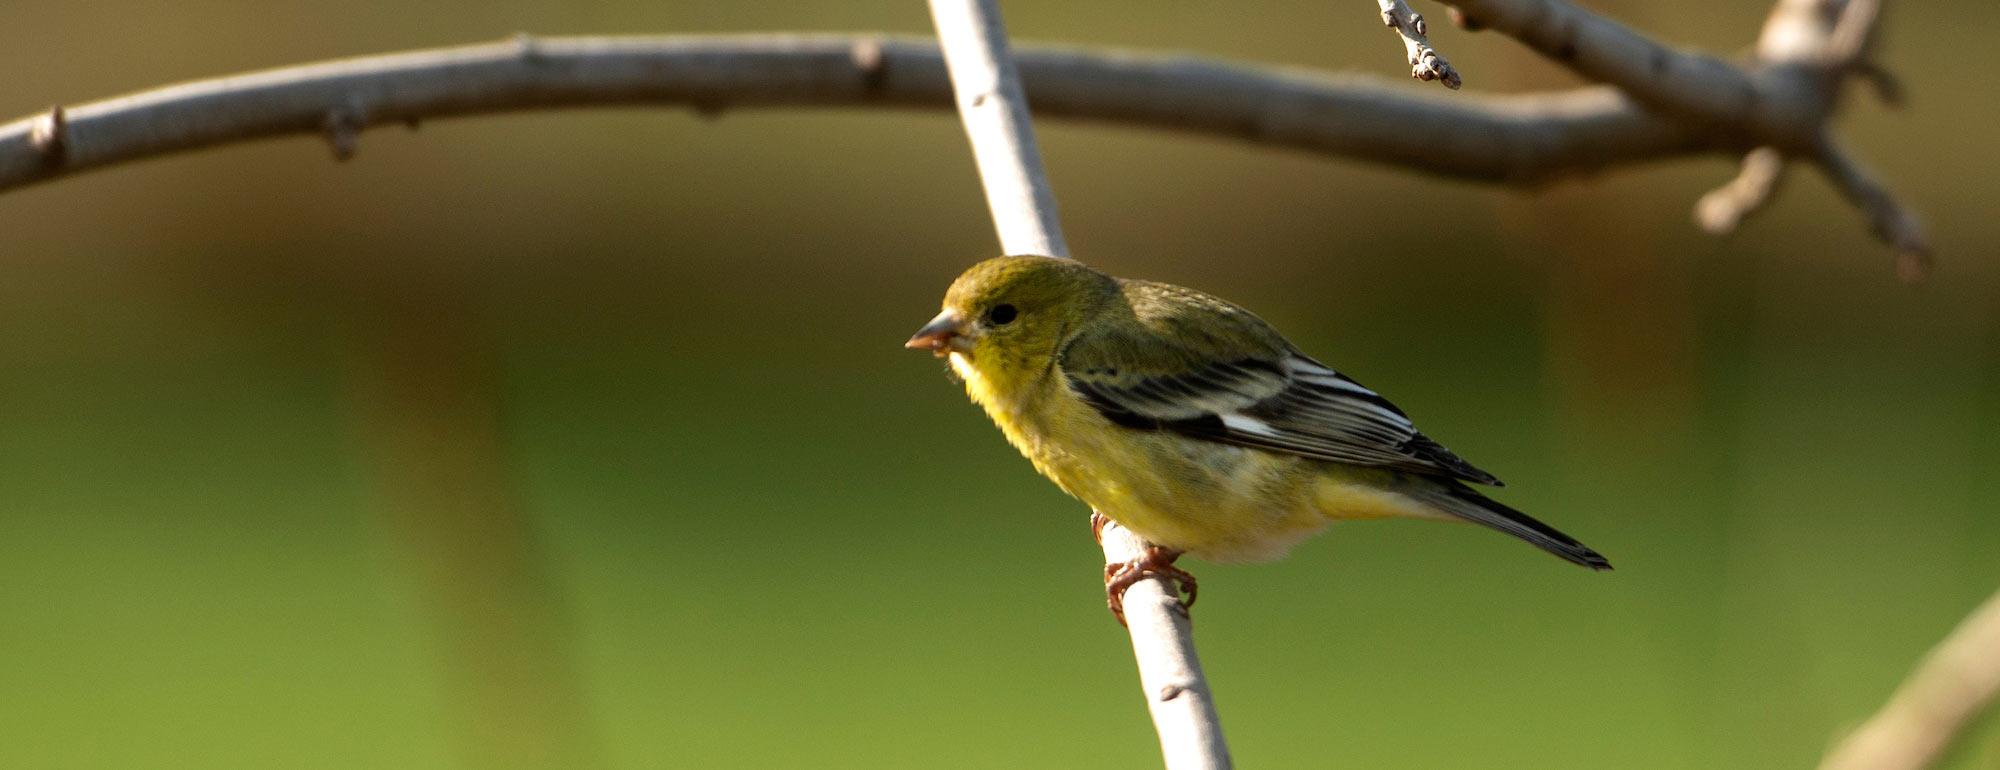 A goldfinch perches on a branch